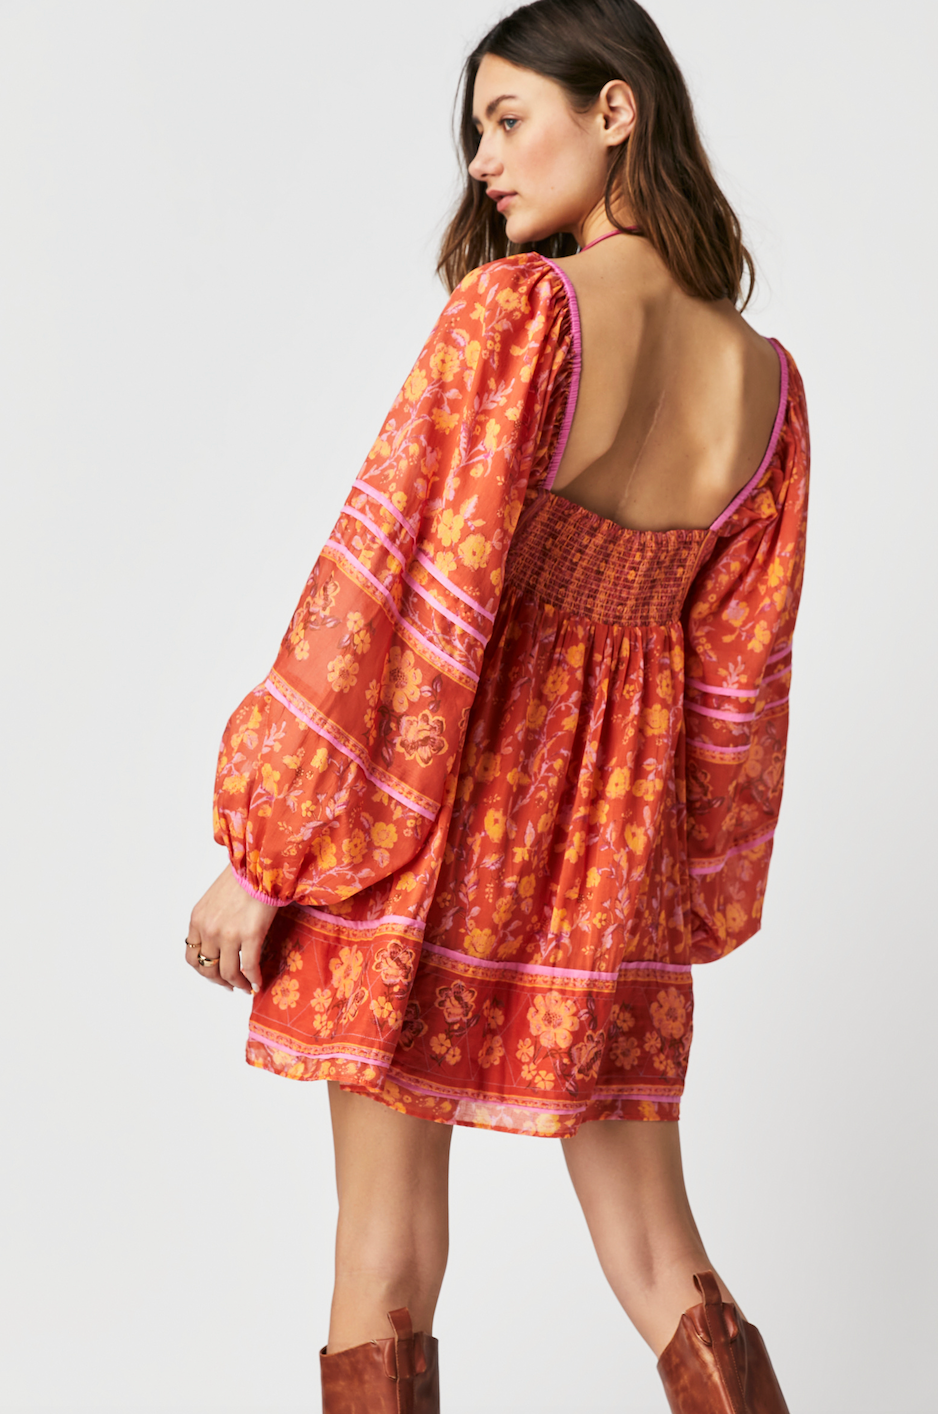 FREE PEOPLE ENDLESS AFTERNOON MINI DRESS IN CHILI COMBO